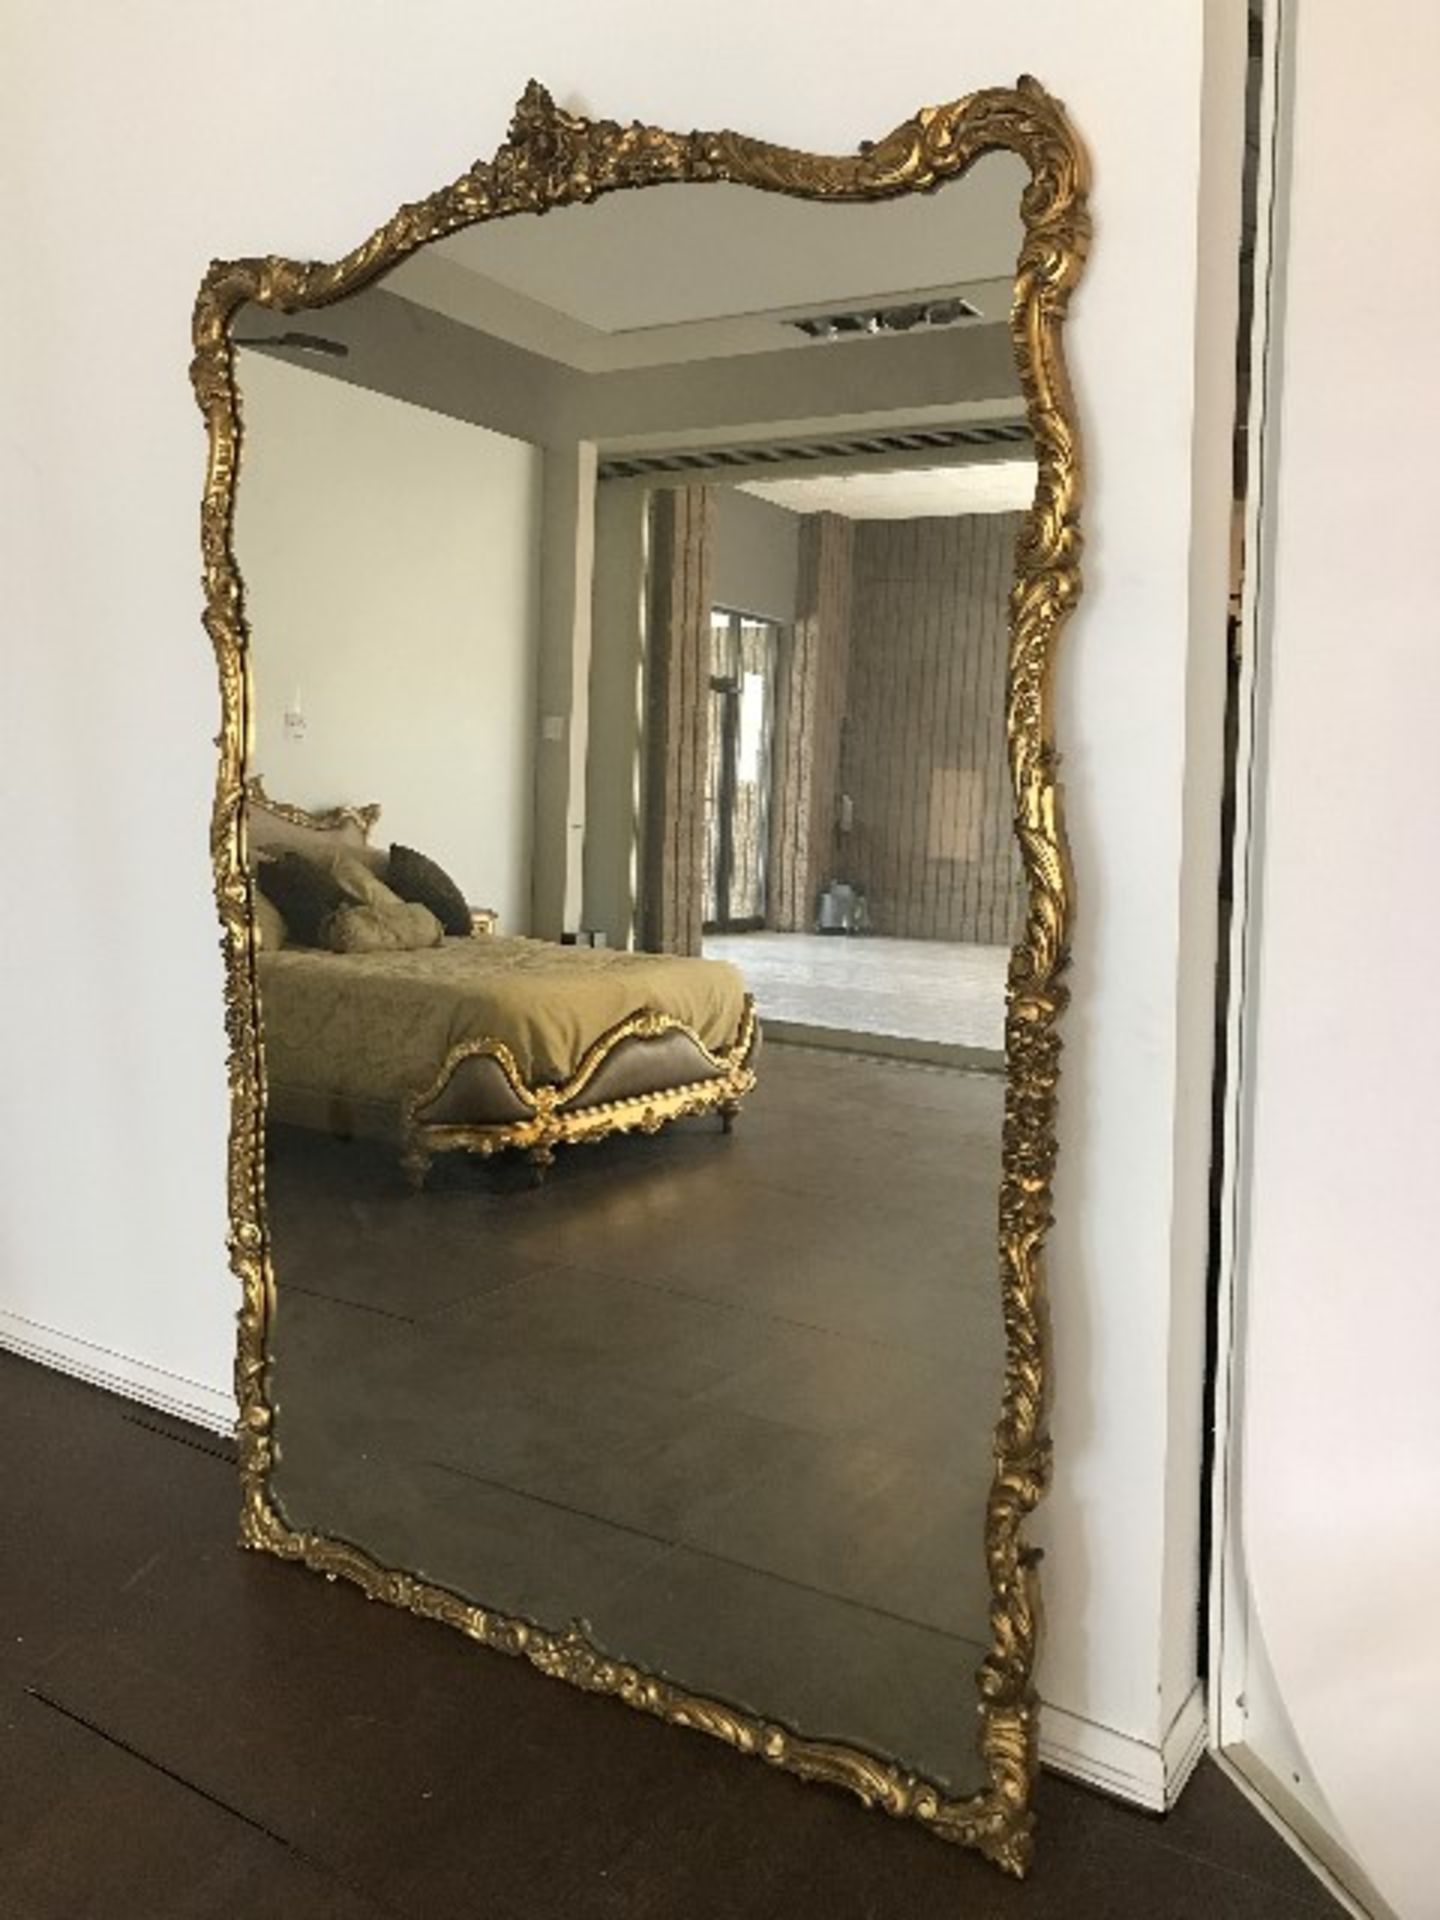 Exquisite 24K gold leaf mirror, AS IS/TEL QUEL - Image 2 of 2